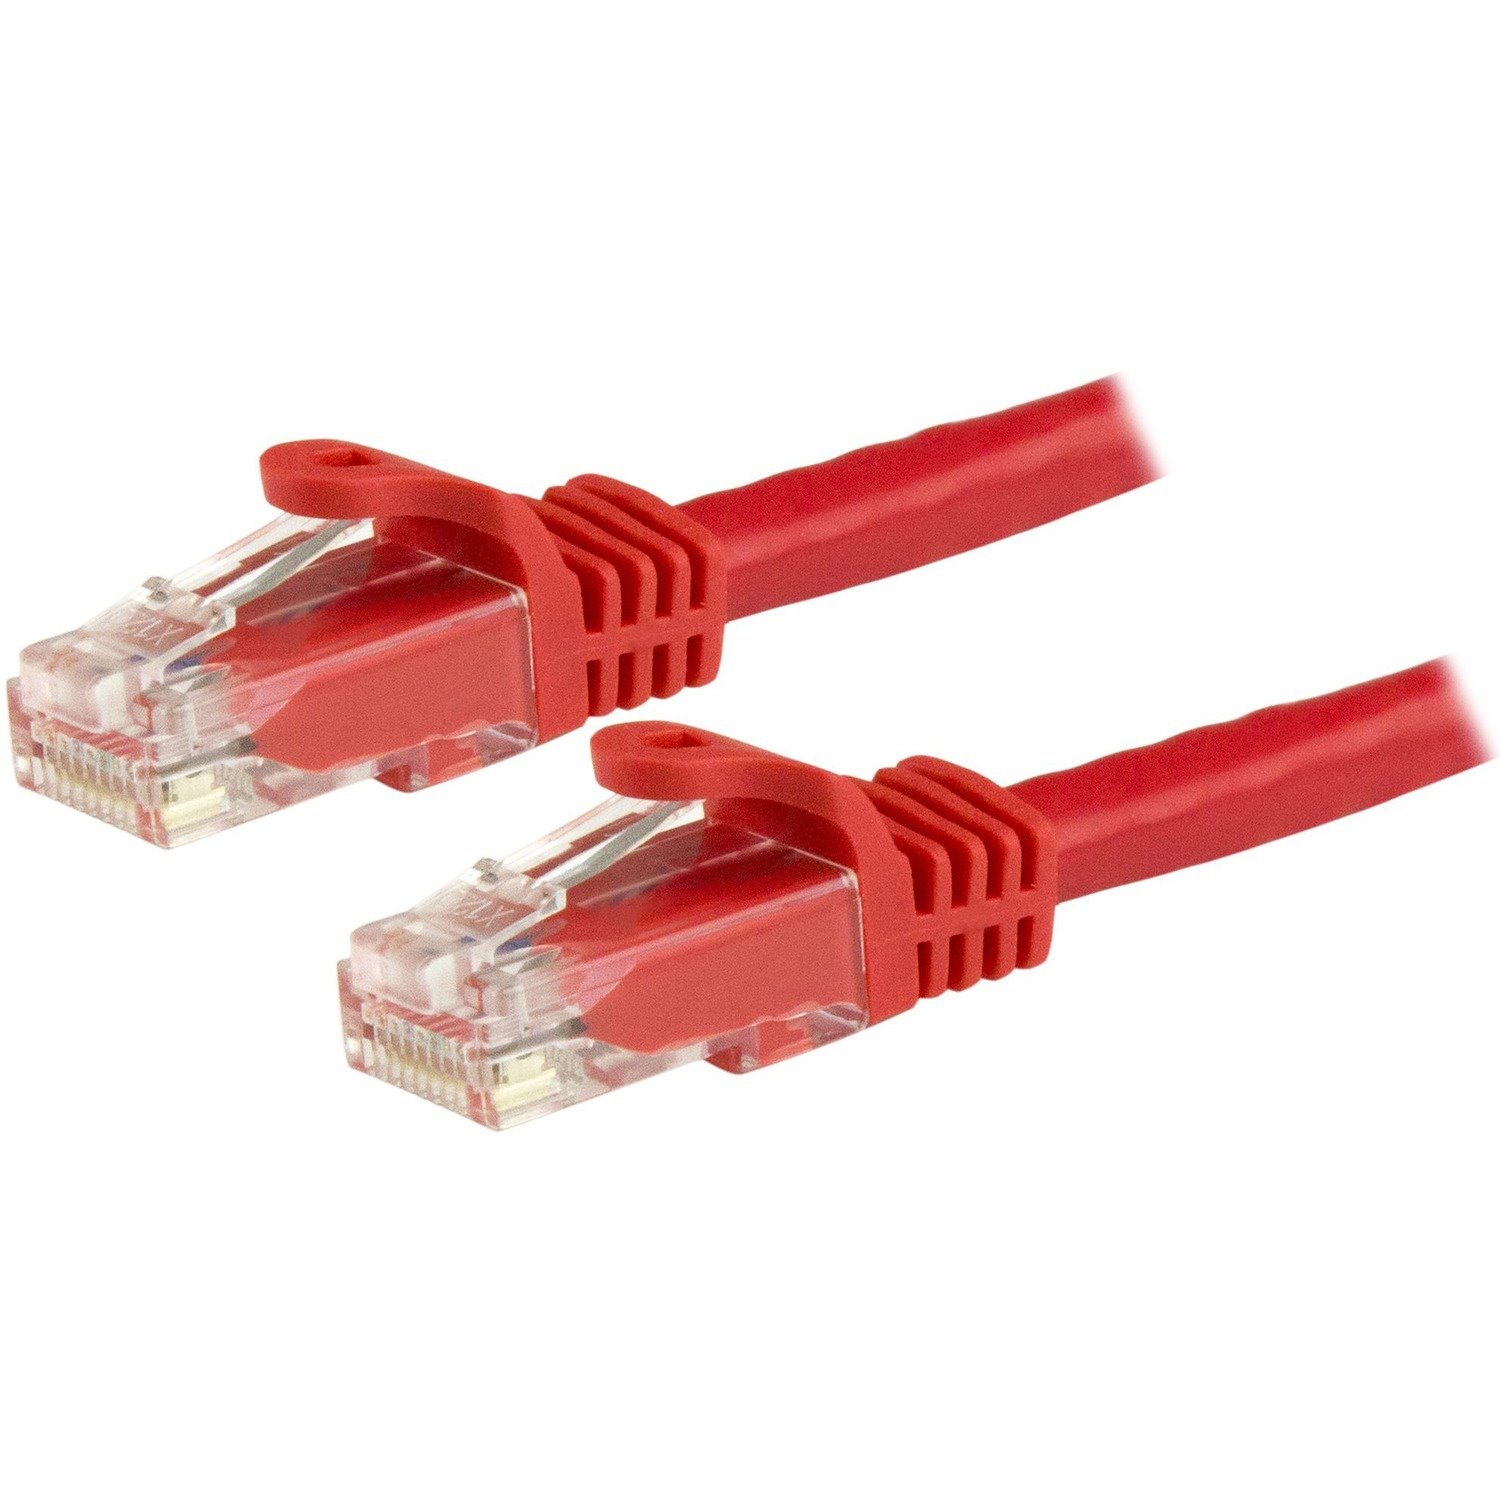 StarTech.com 7.50 m Category 6 Network Cable for Network Device, Wall Outlet, Workstation, Distribution Panel, Security Device, VoIP Device, Hub - 1